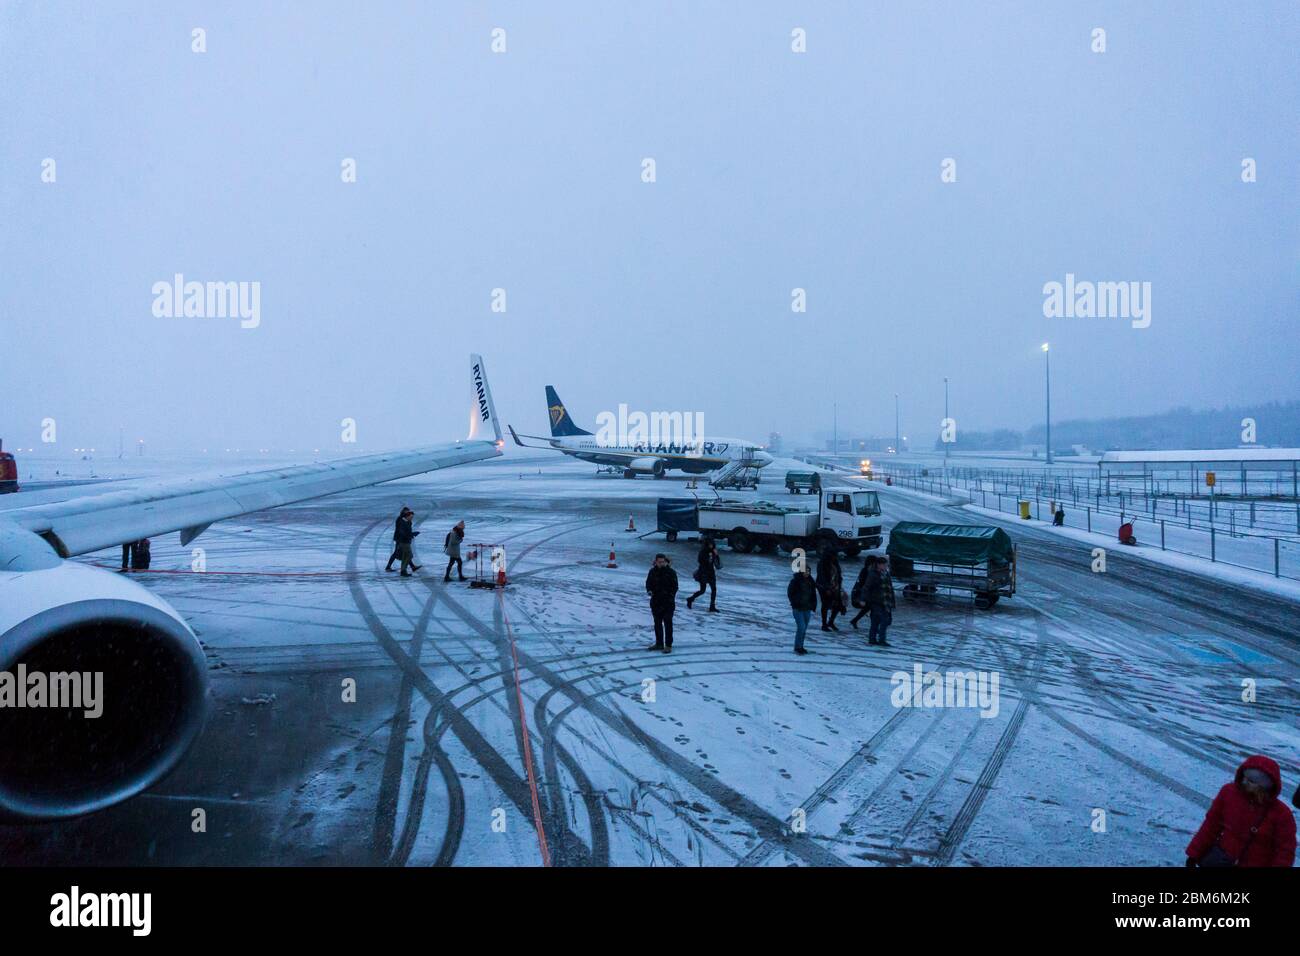 Ryan Air at Warsaw Modlin Airport in the snow and ice in winter. Stock Photo